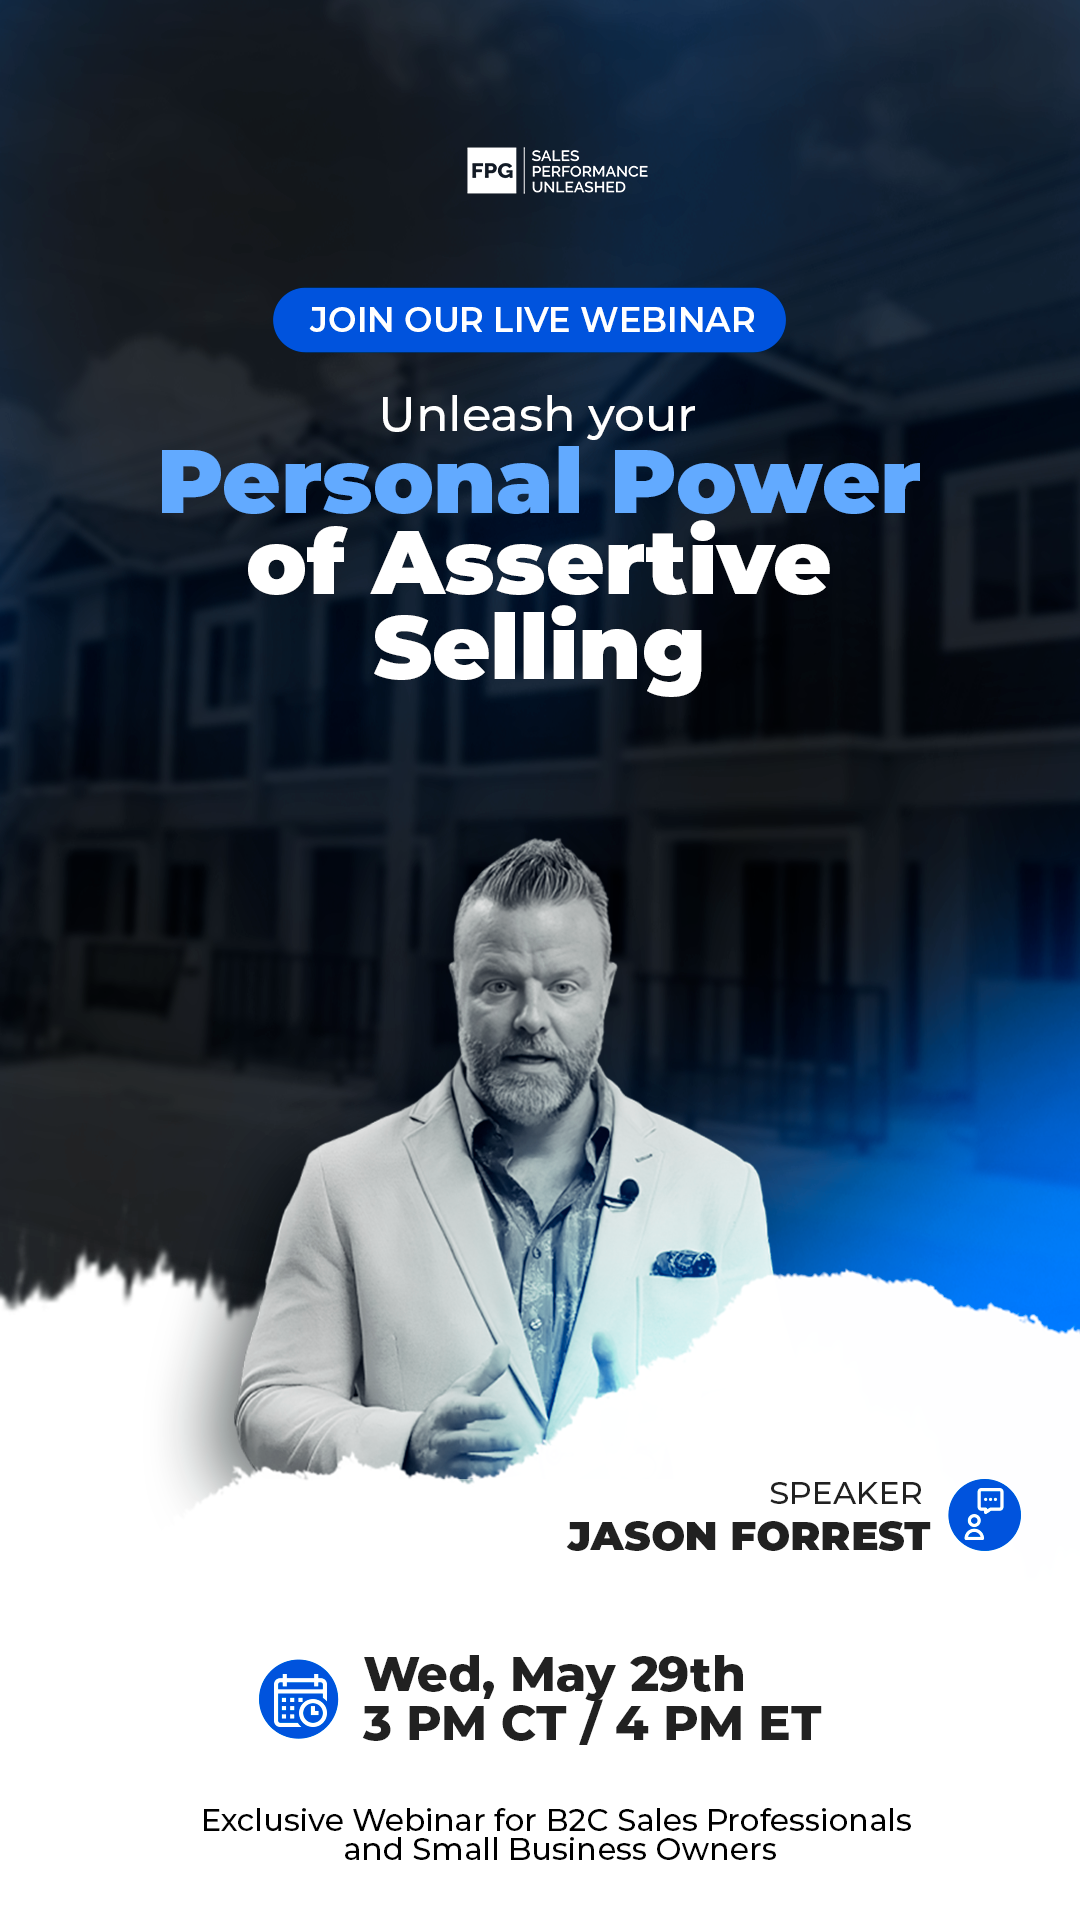 Unleash Your Personal Power of Assertive Selling